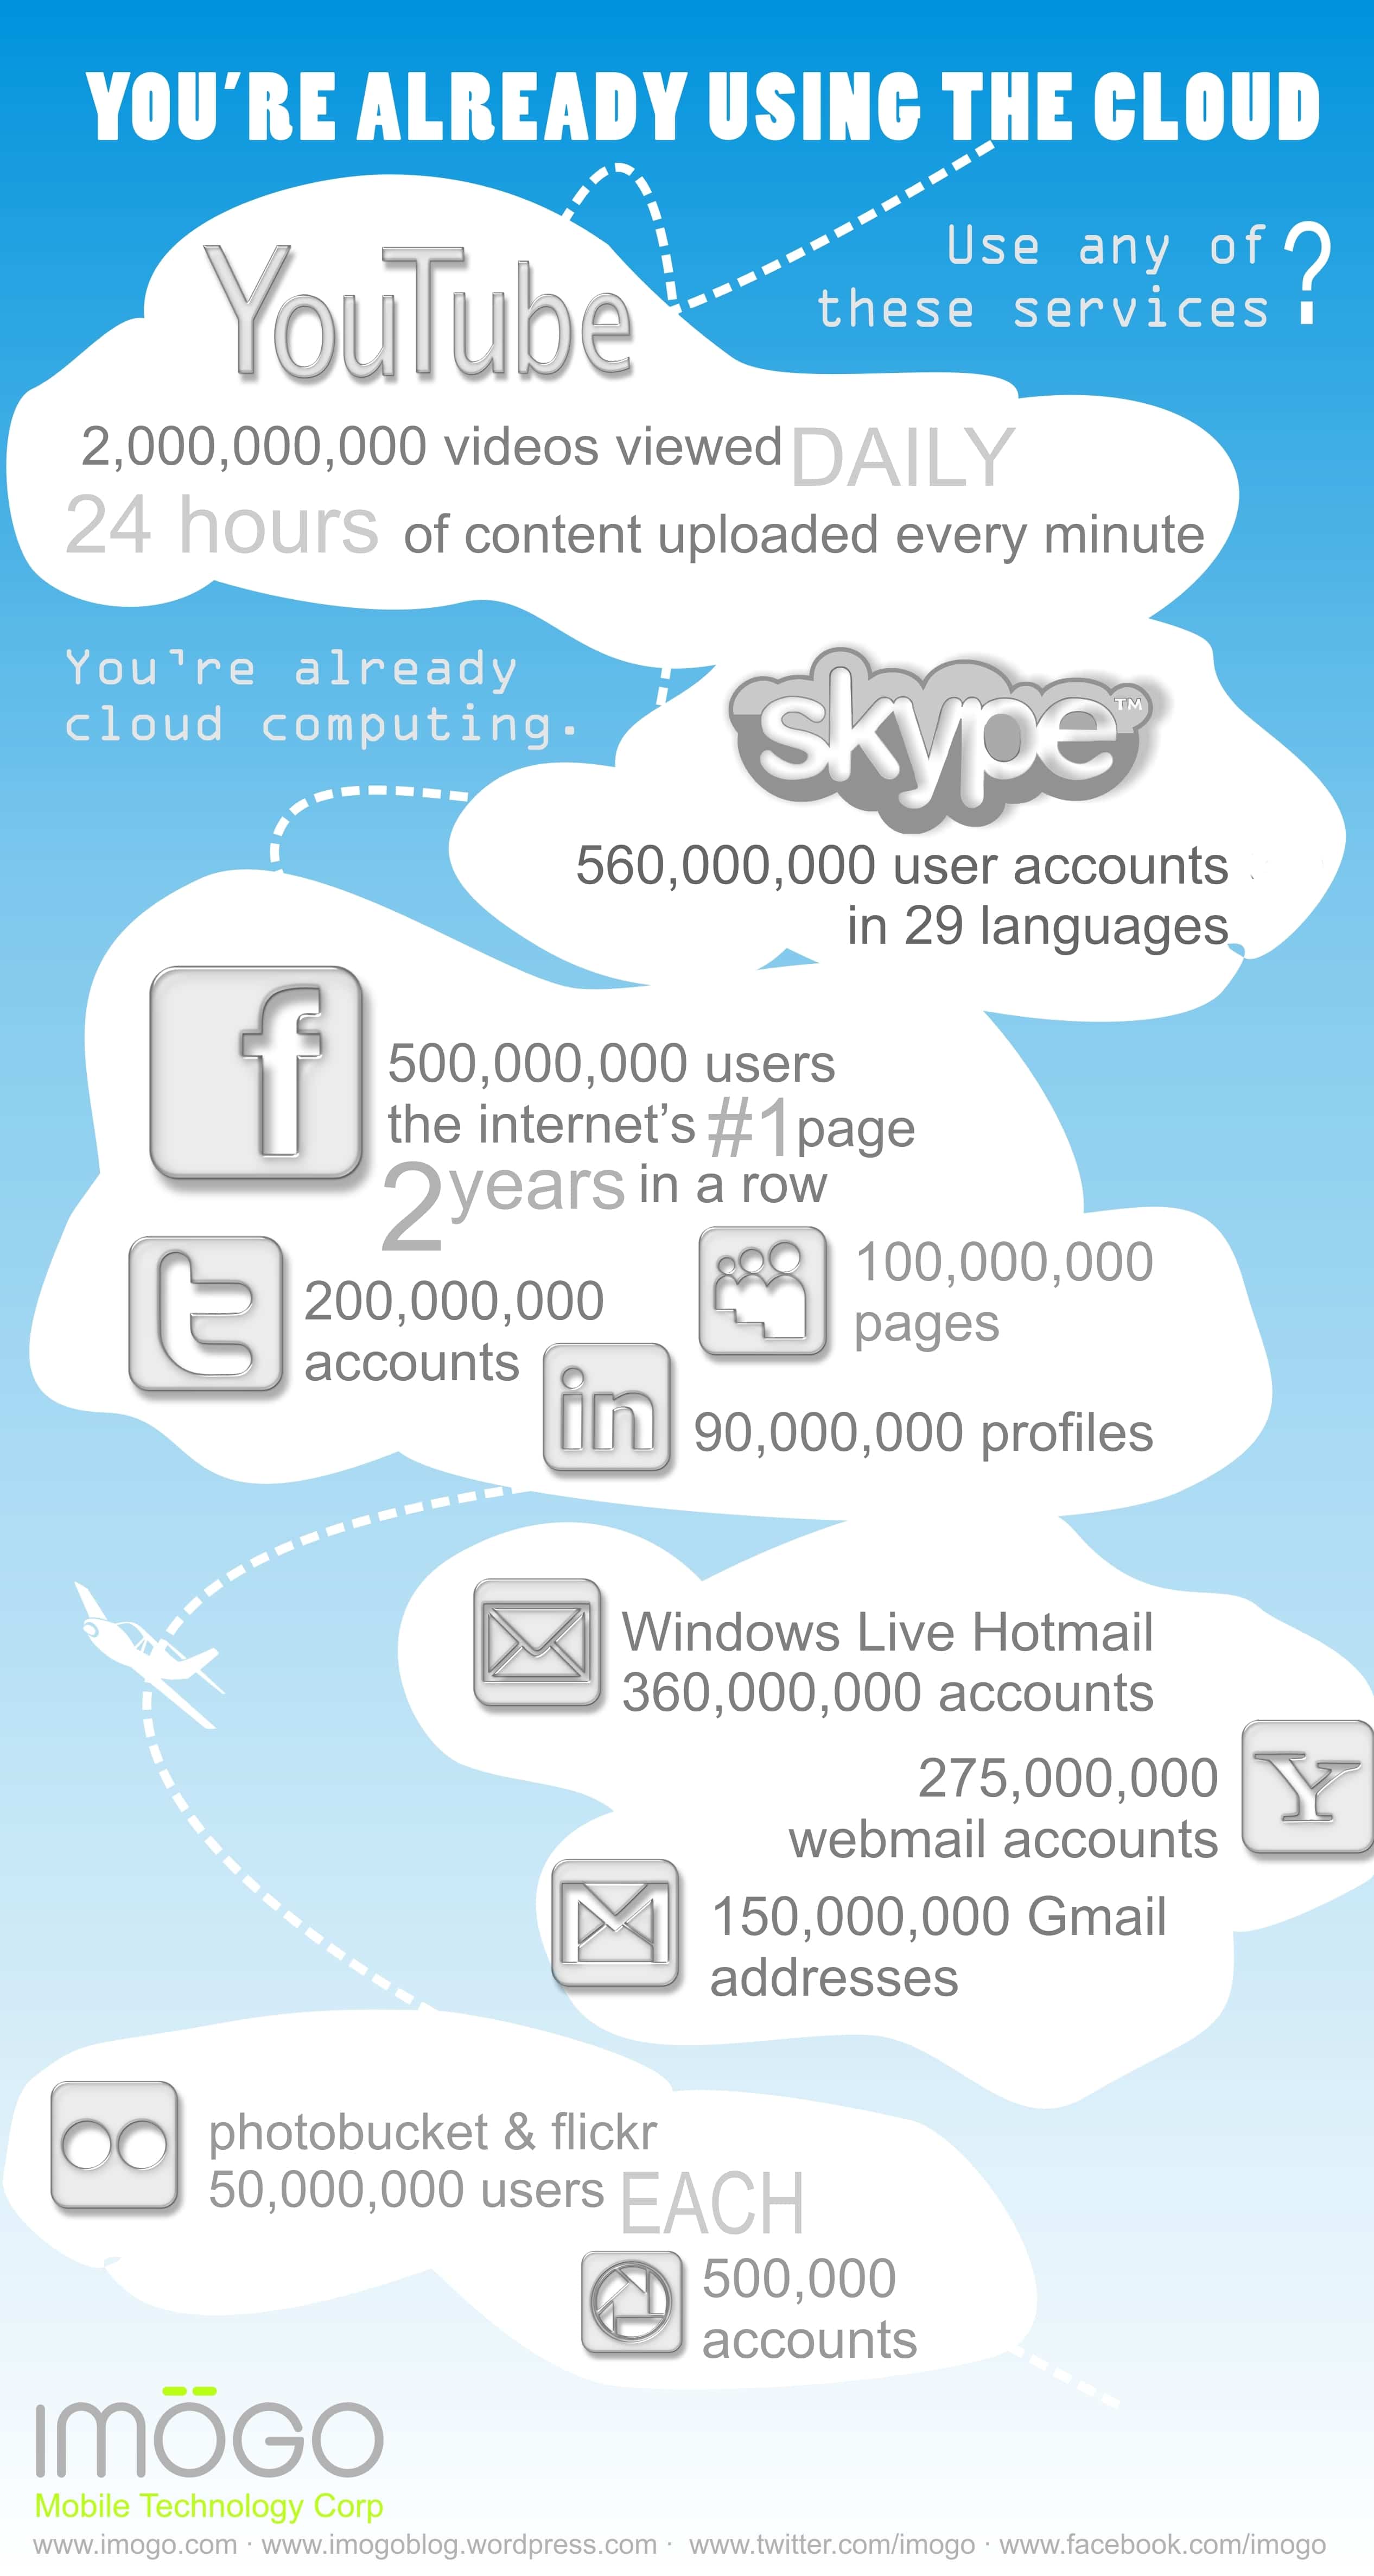 Social Networking Is Already Using The Cloud [Infographic]